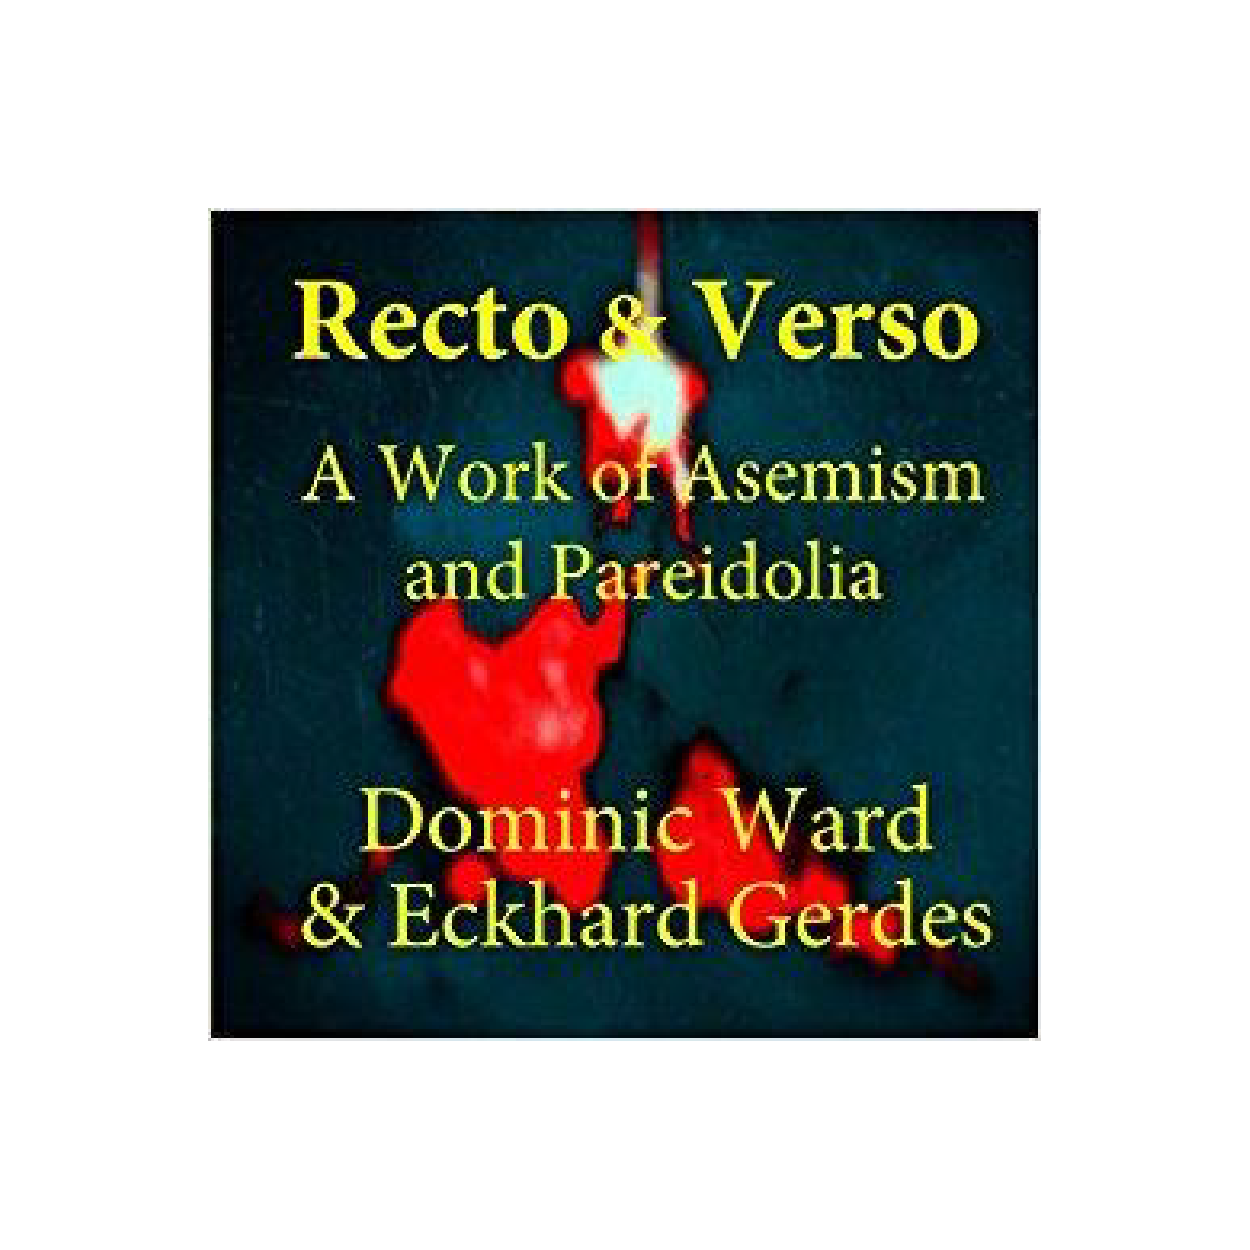 Recto & Verso: A Work of Asemism and Pareidolia by Dominic Ward